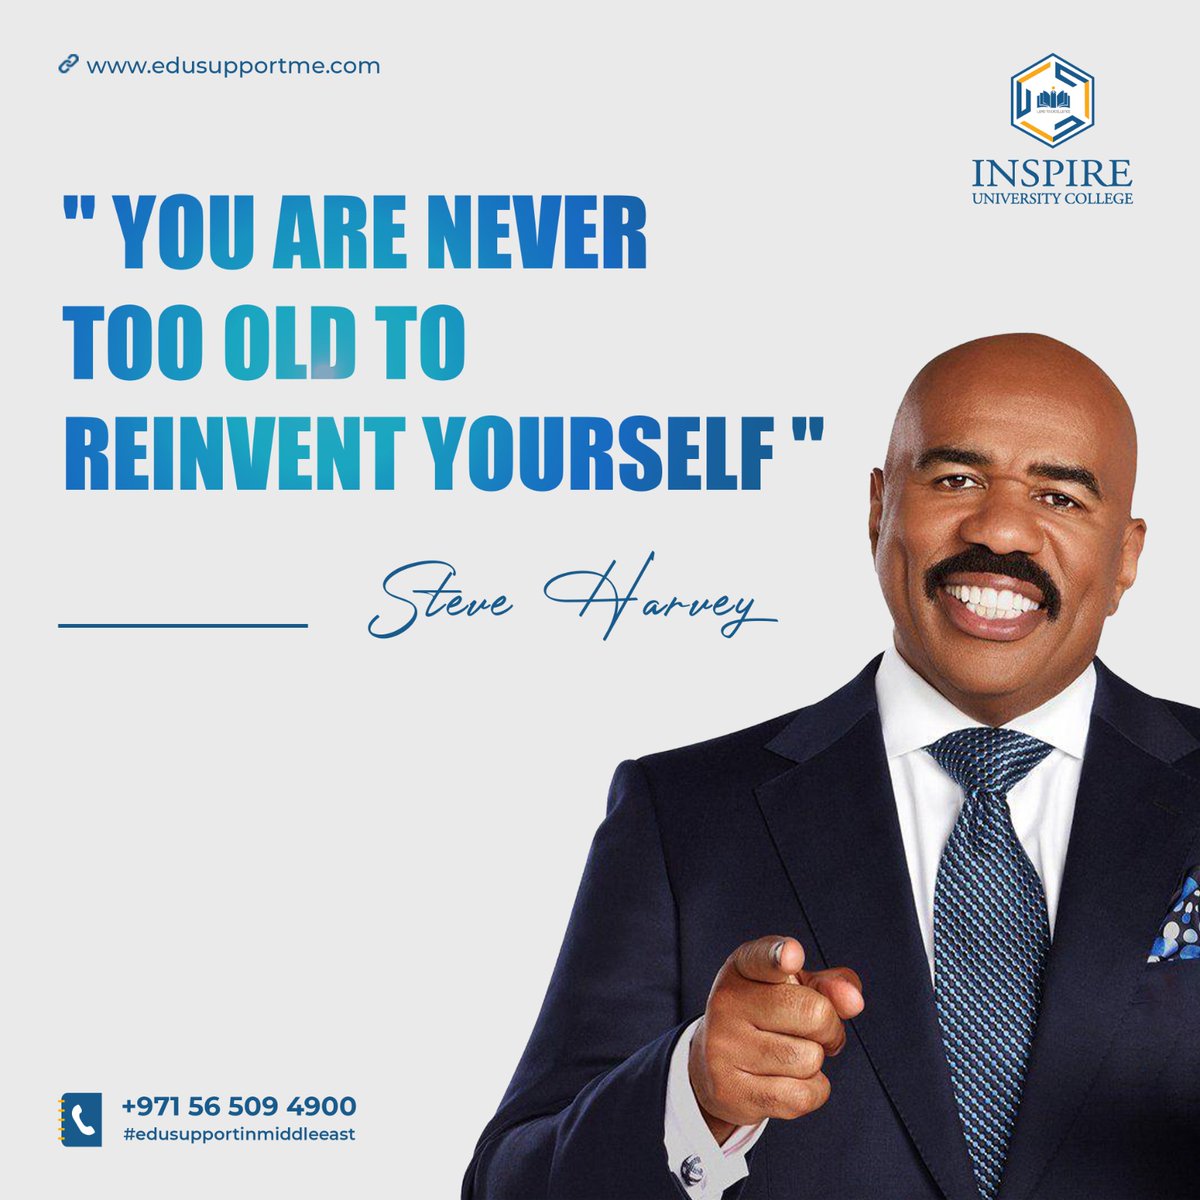 Take inspiration from Steve Harvey's wise words and embark on your journey of self-discovery and transformation. It's never too late to chase your dreams and become the best version of yourself. 💫
.
.
.
#ReinventYourself #SteveHarvey #SelfDiscovery #motivation #celebrityquotes